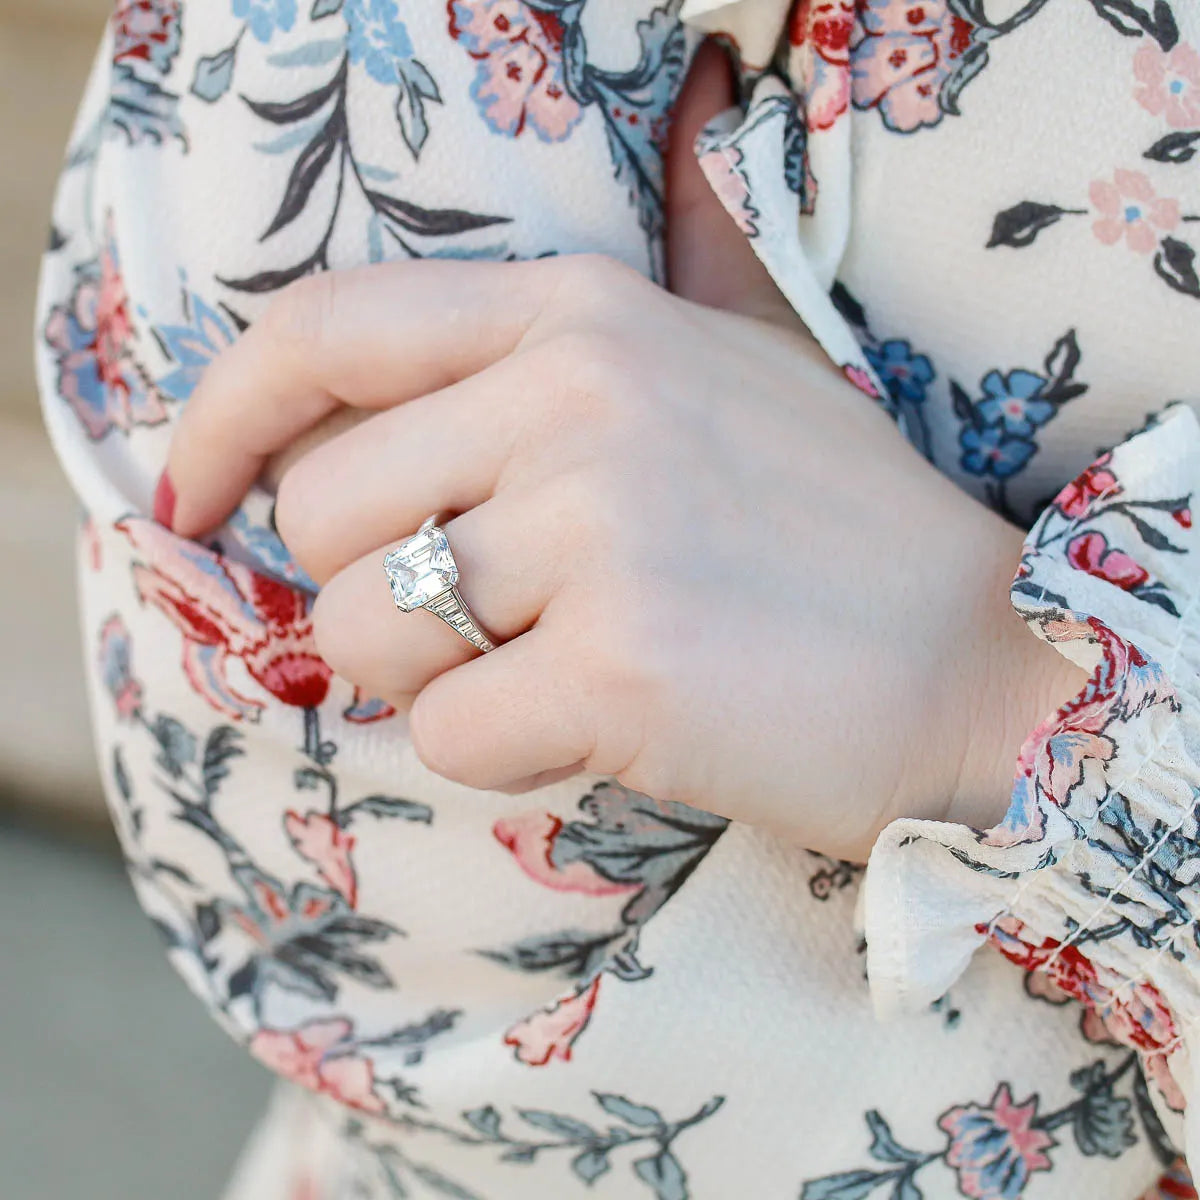 Things to Know About Updating Your Engagement Ring